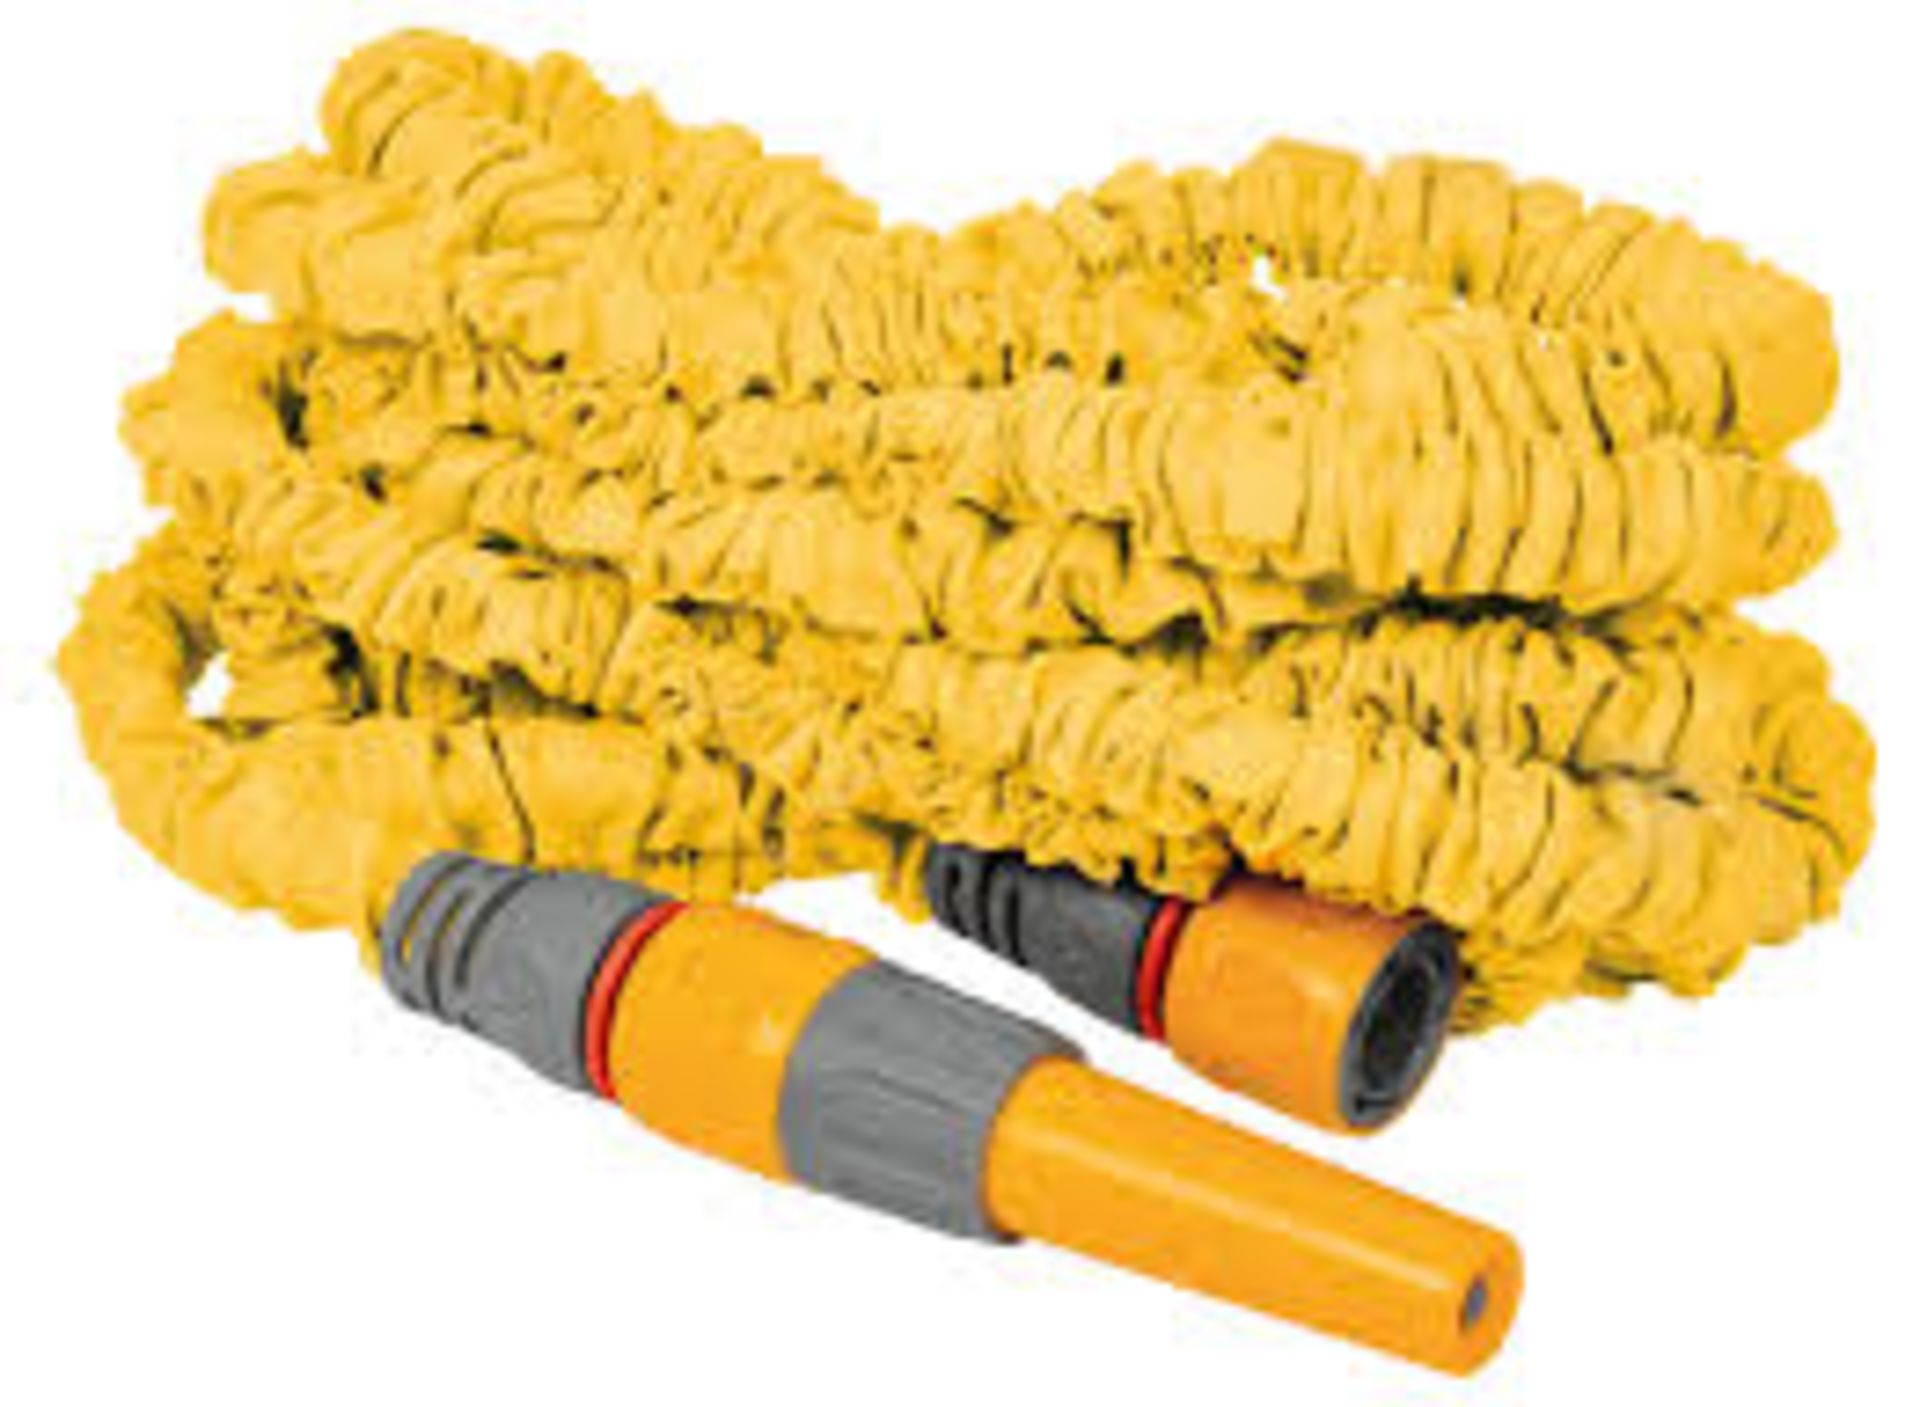 Hozelock Superhoze 30m. - R13a.9. Expands up to 3 times its original length for easy reach and